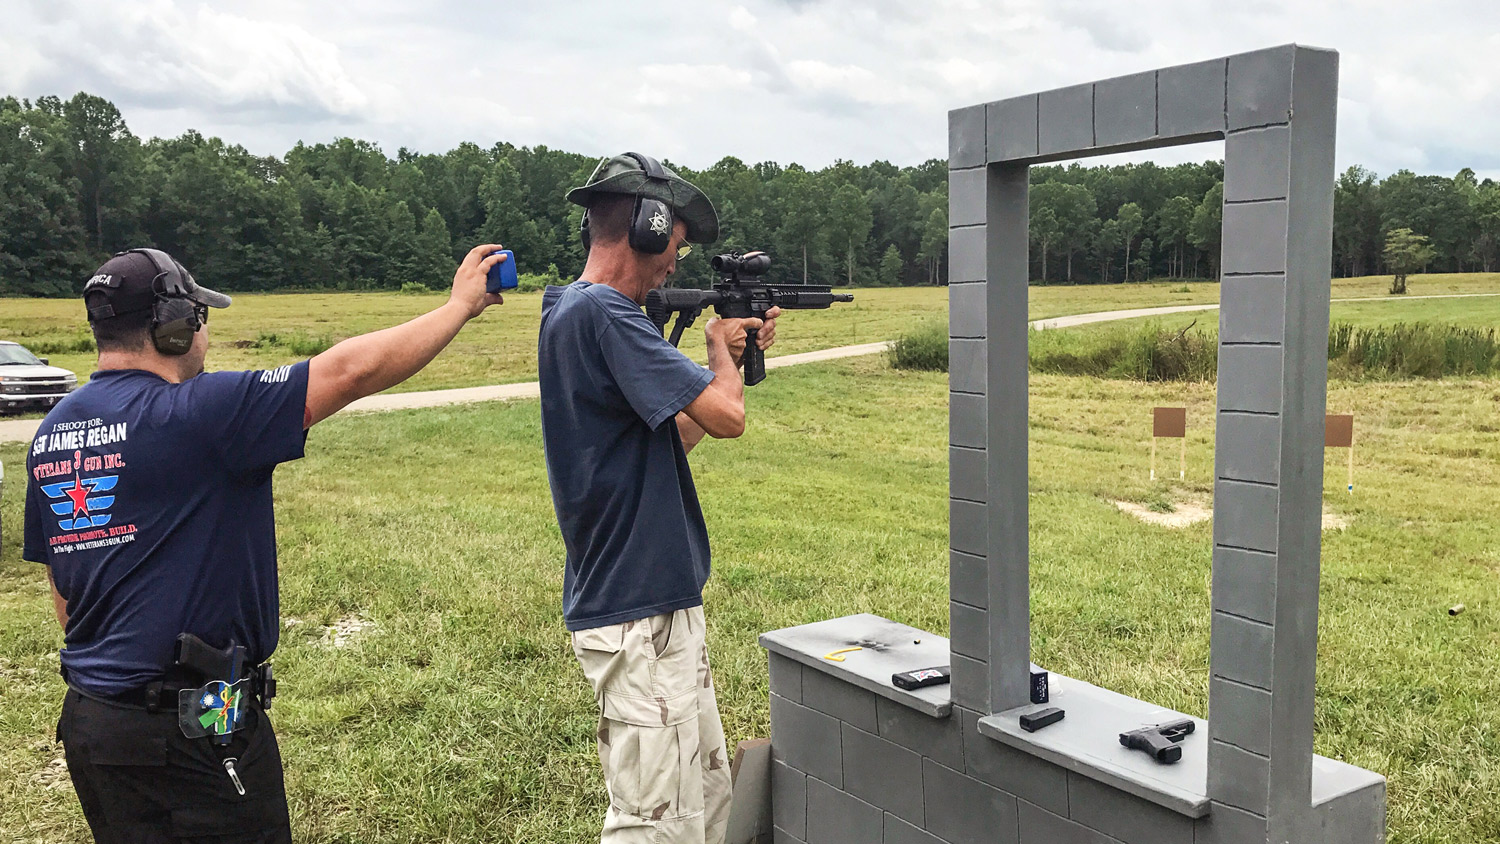 The additional space at Camp Atterbury will allow for a more diverse selection of shooting disciplines.